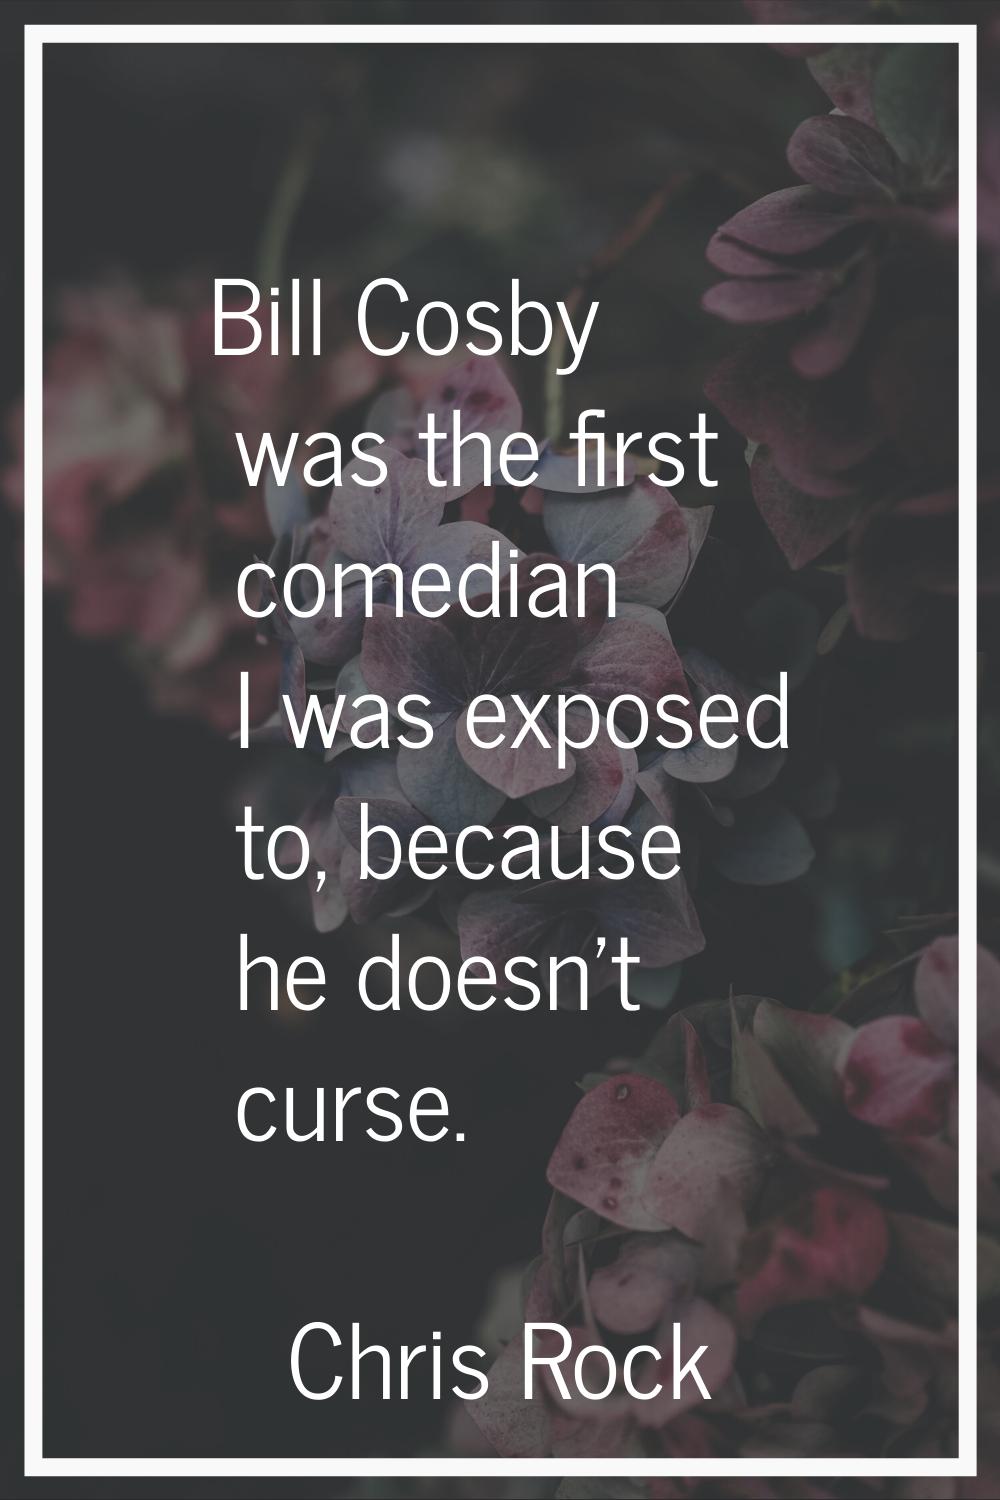 Bill Cosby was the first comedian I was exposed to, because he doesn't curse.